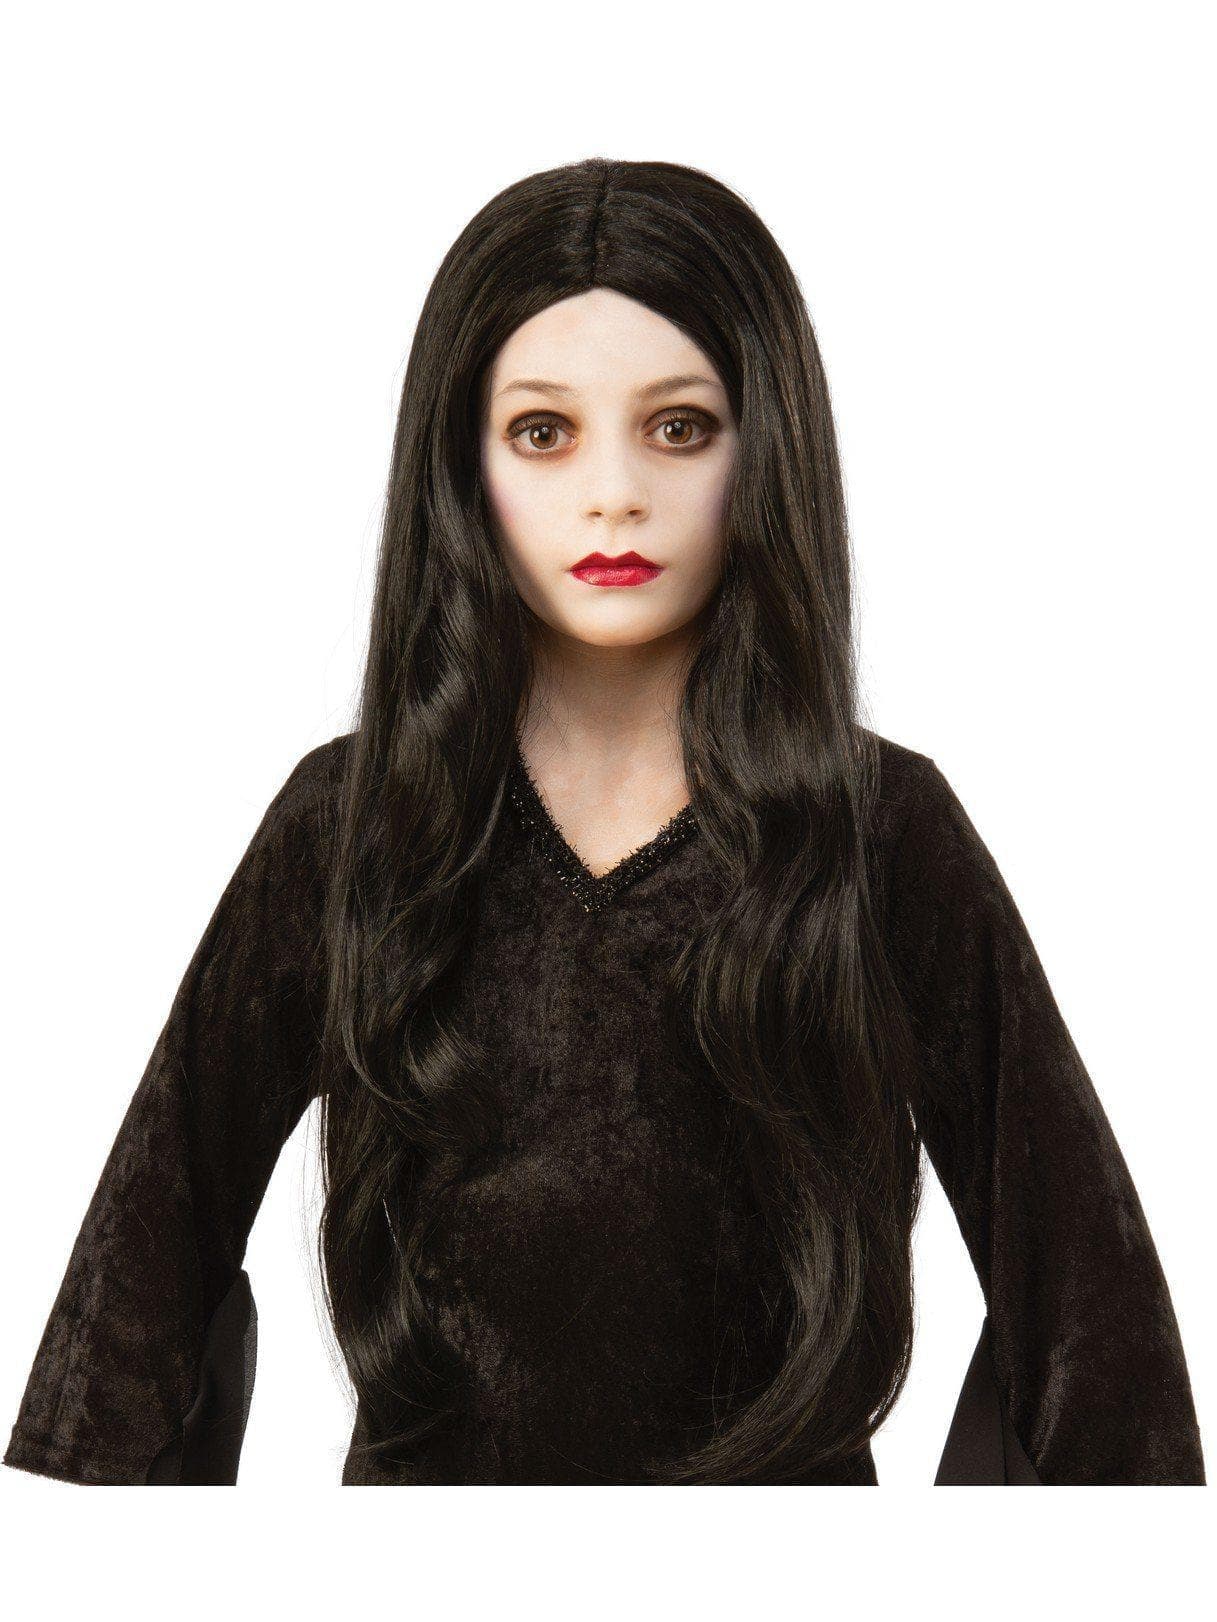 Girls' The Addams Family Morticia Wig - costumes.com